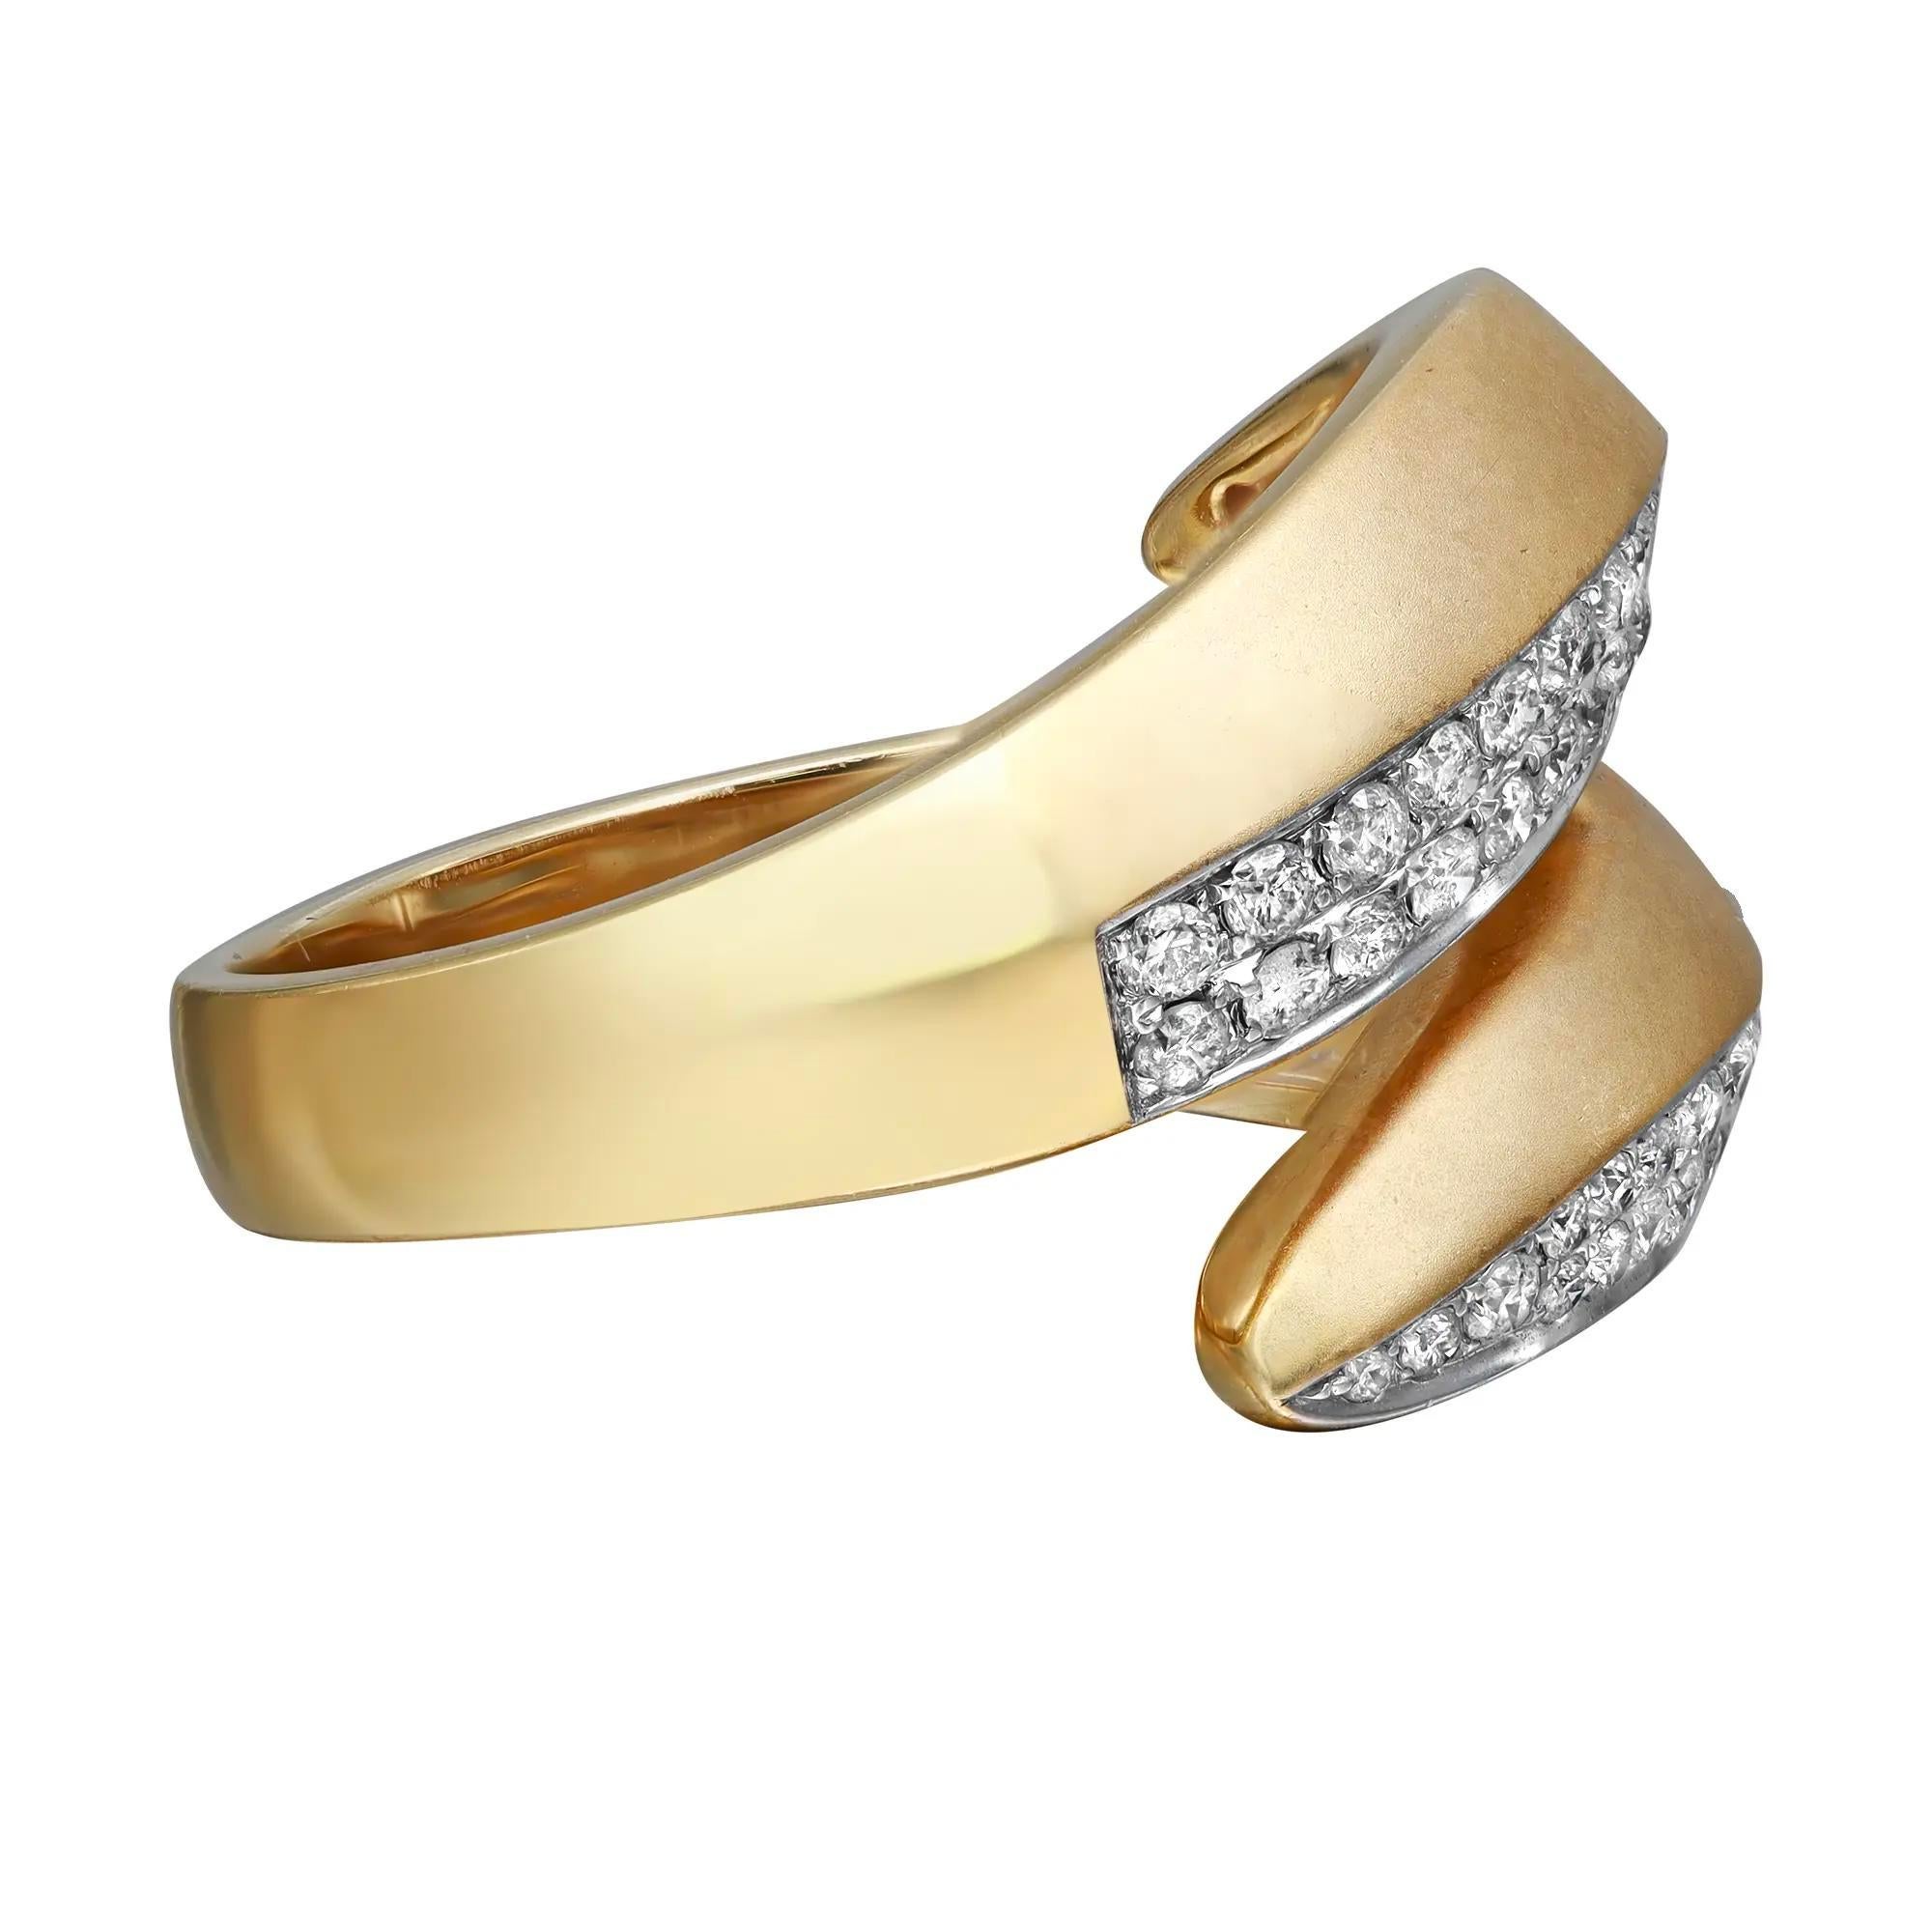 Bold and elegant diamond statement ring rendered in matt and highly polished 14K yellow gold. This ring features sparkling round brilliant cut diamonds in pave setting totaling 0.69 carat. Diamond quality: I color and SI clarity. Ring size: 7.25.